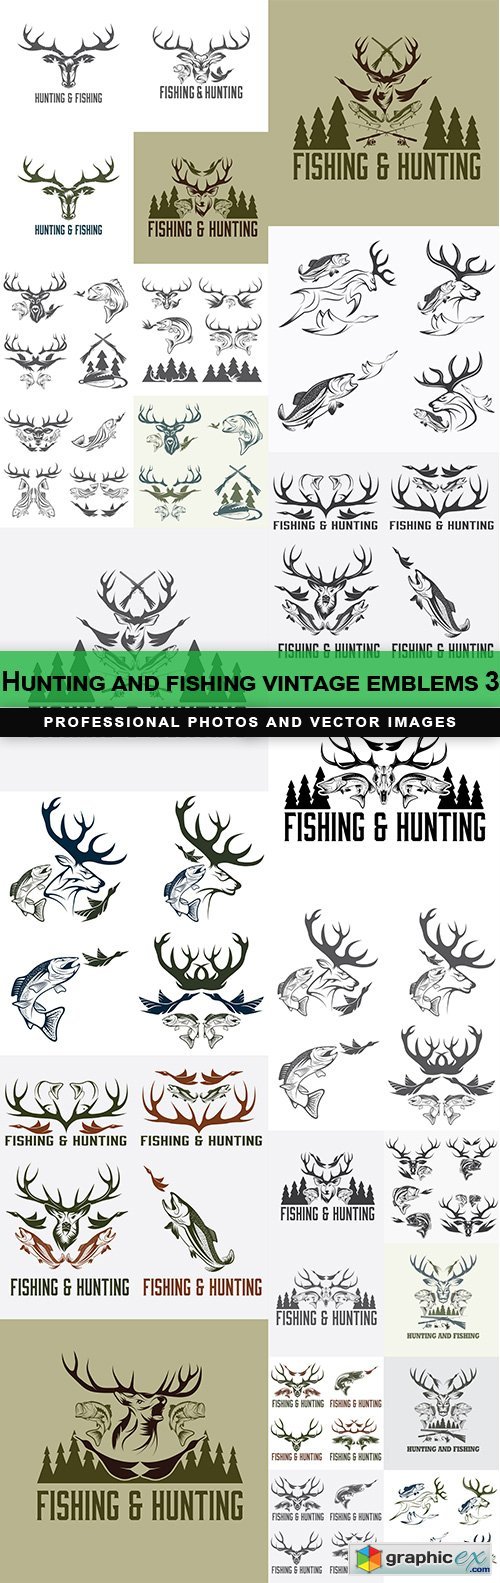 Hunting and fishing vintage emblems 3